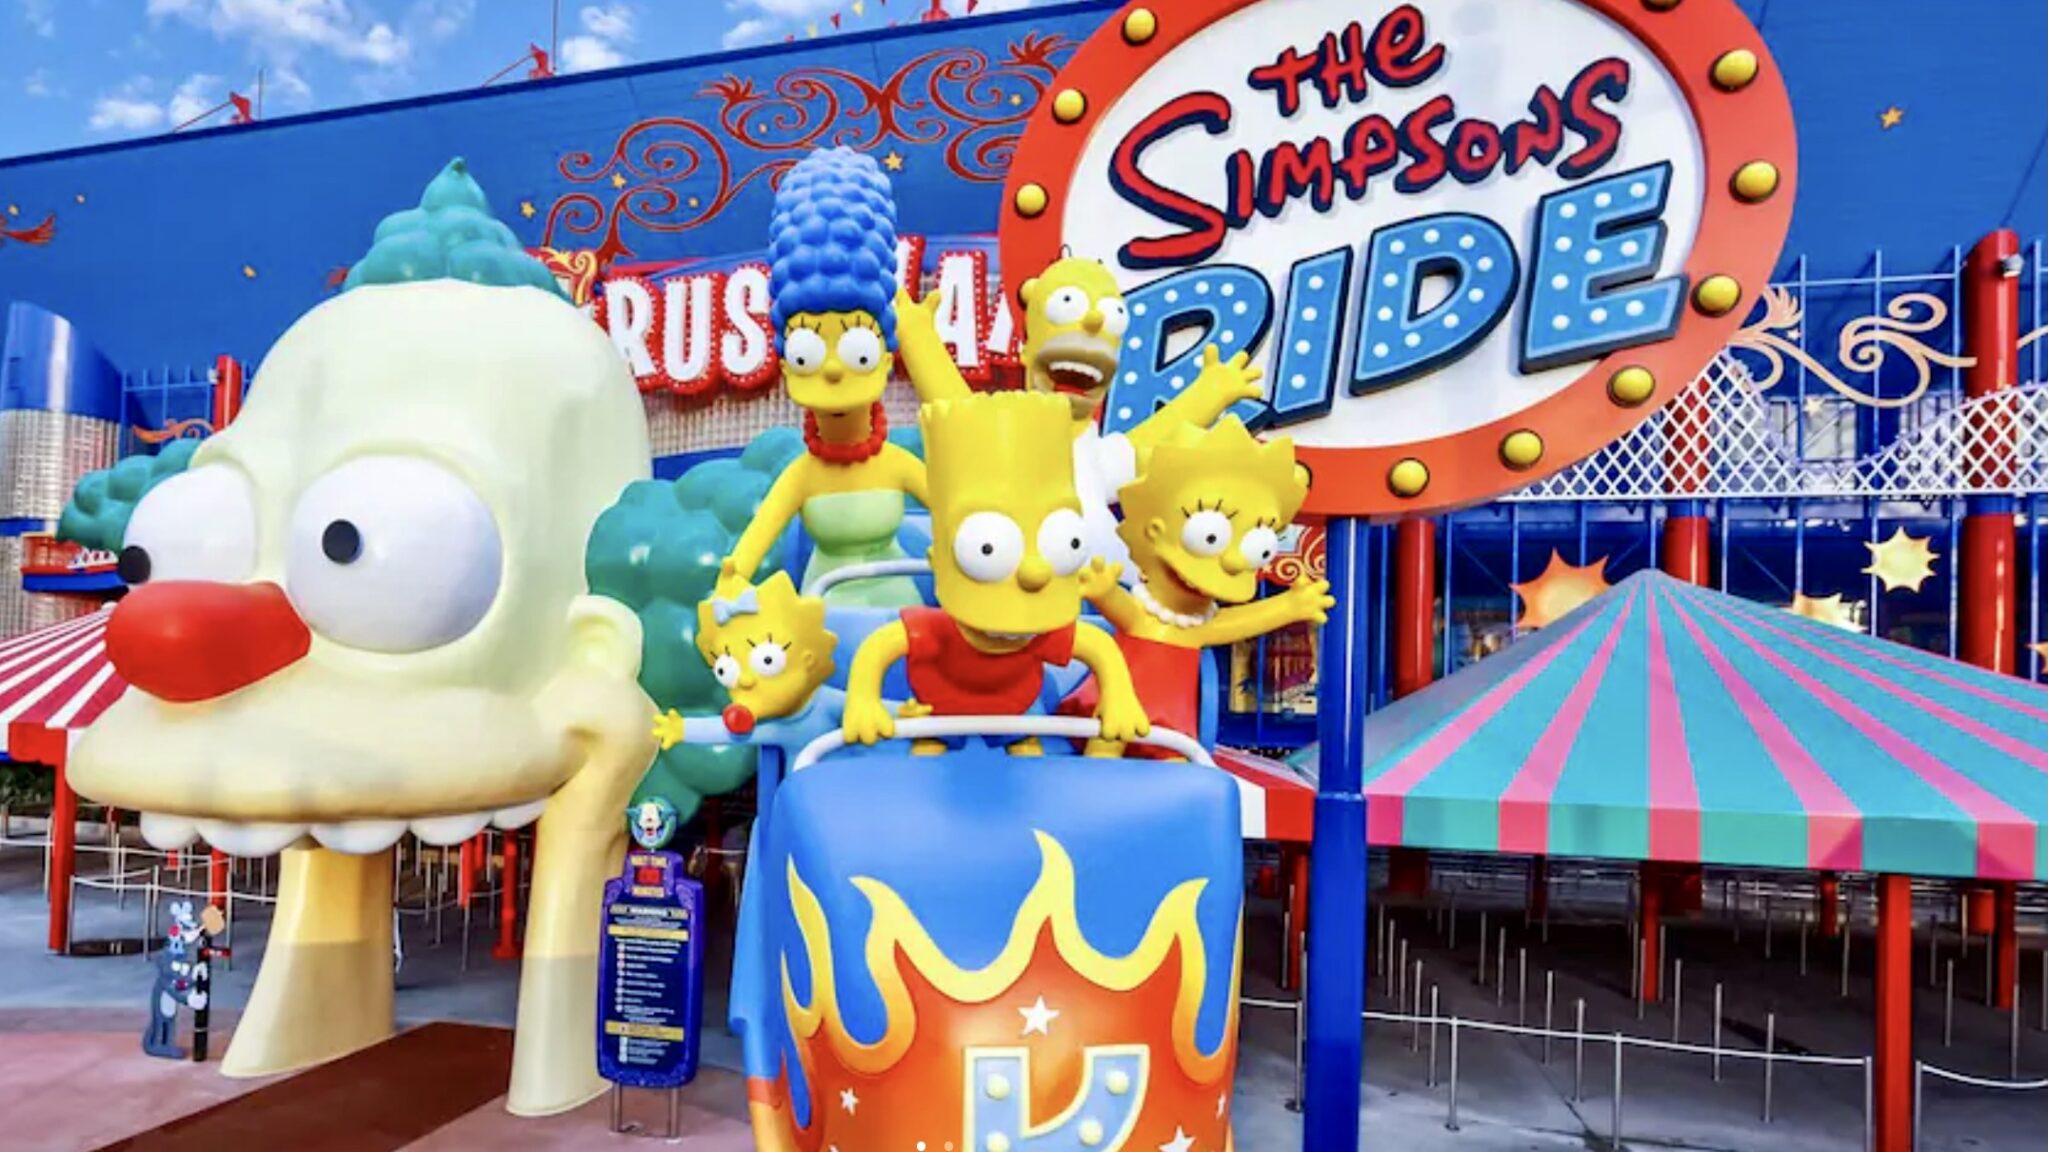 Movie-Inspired theme park rides - The Simpsons Ride